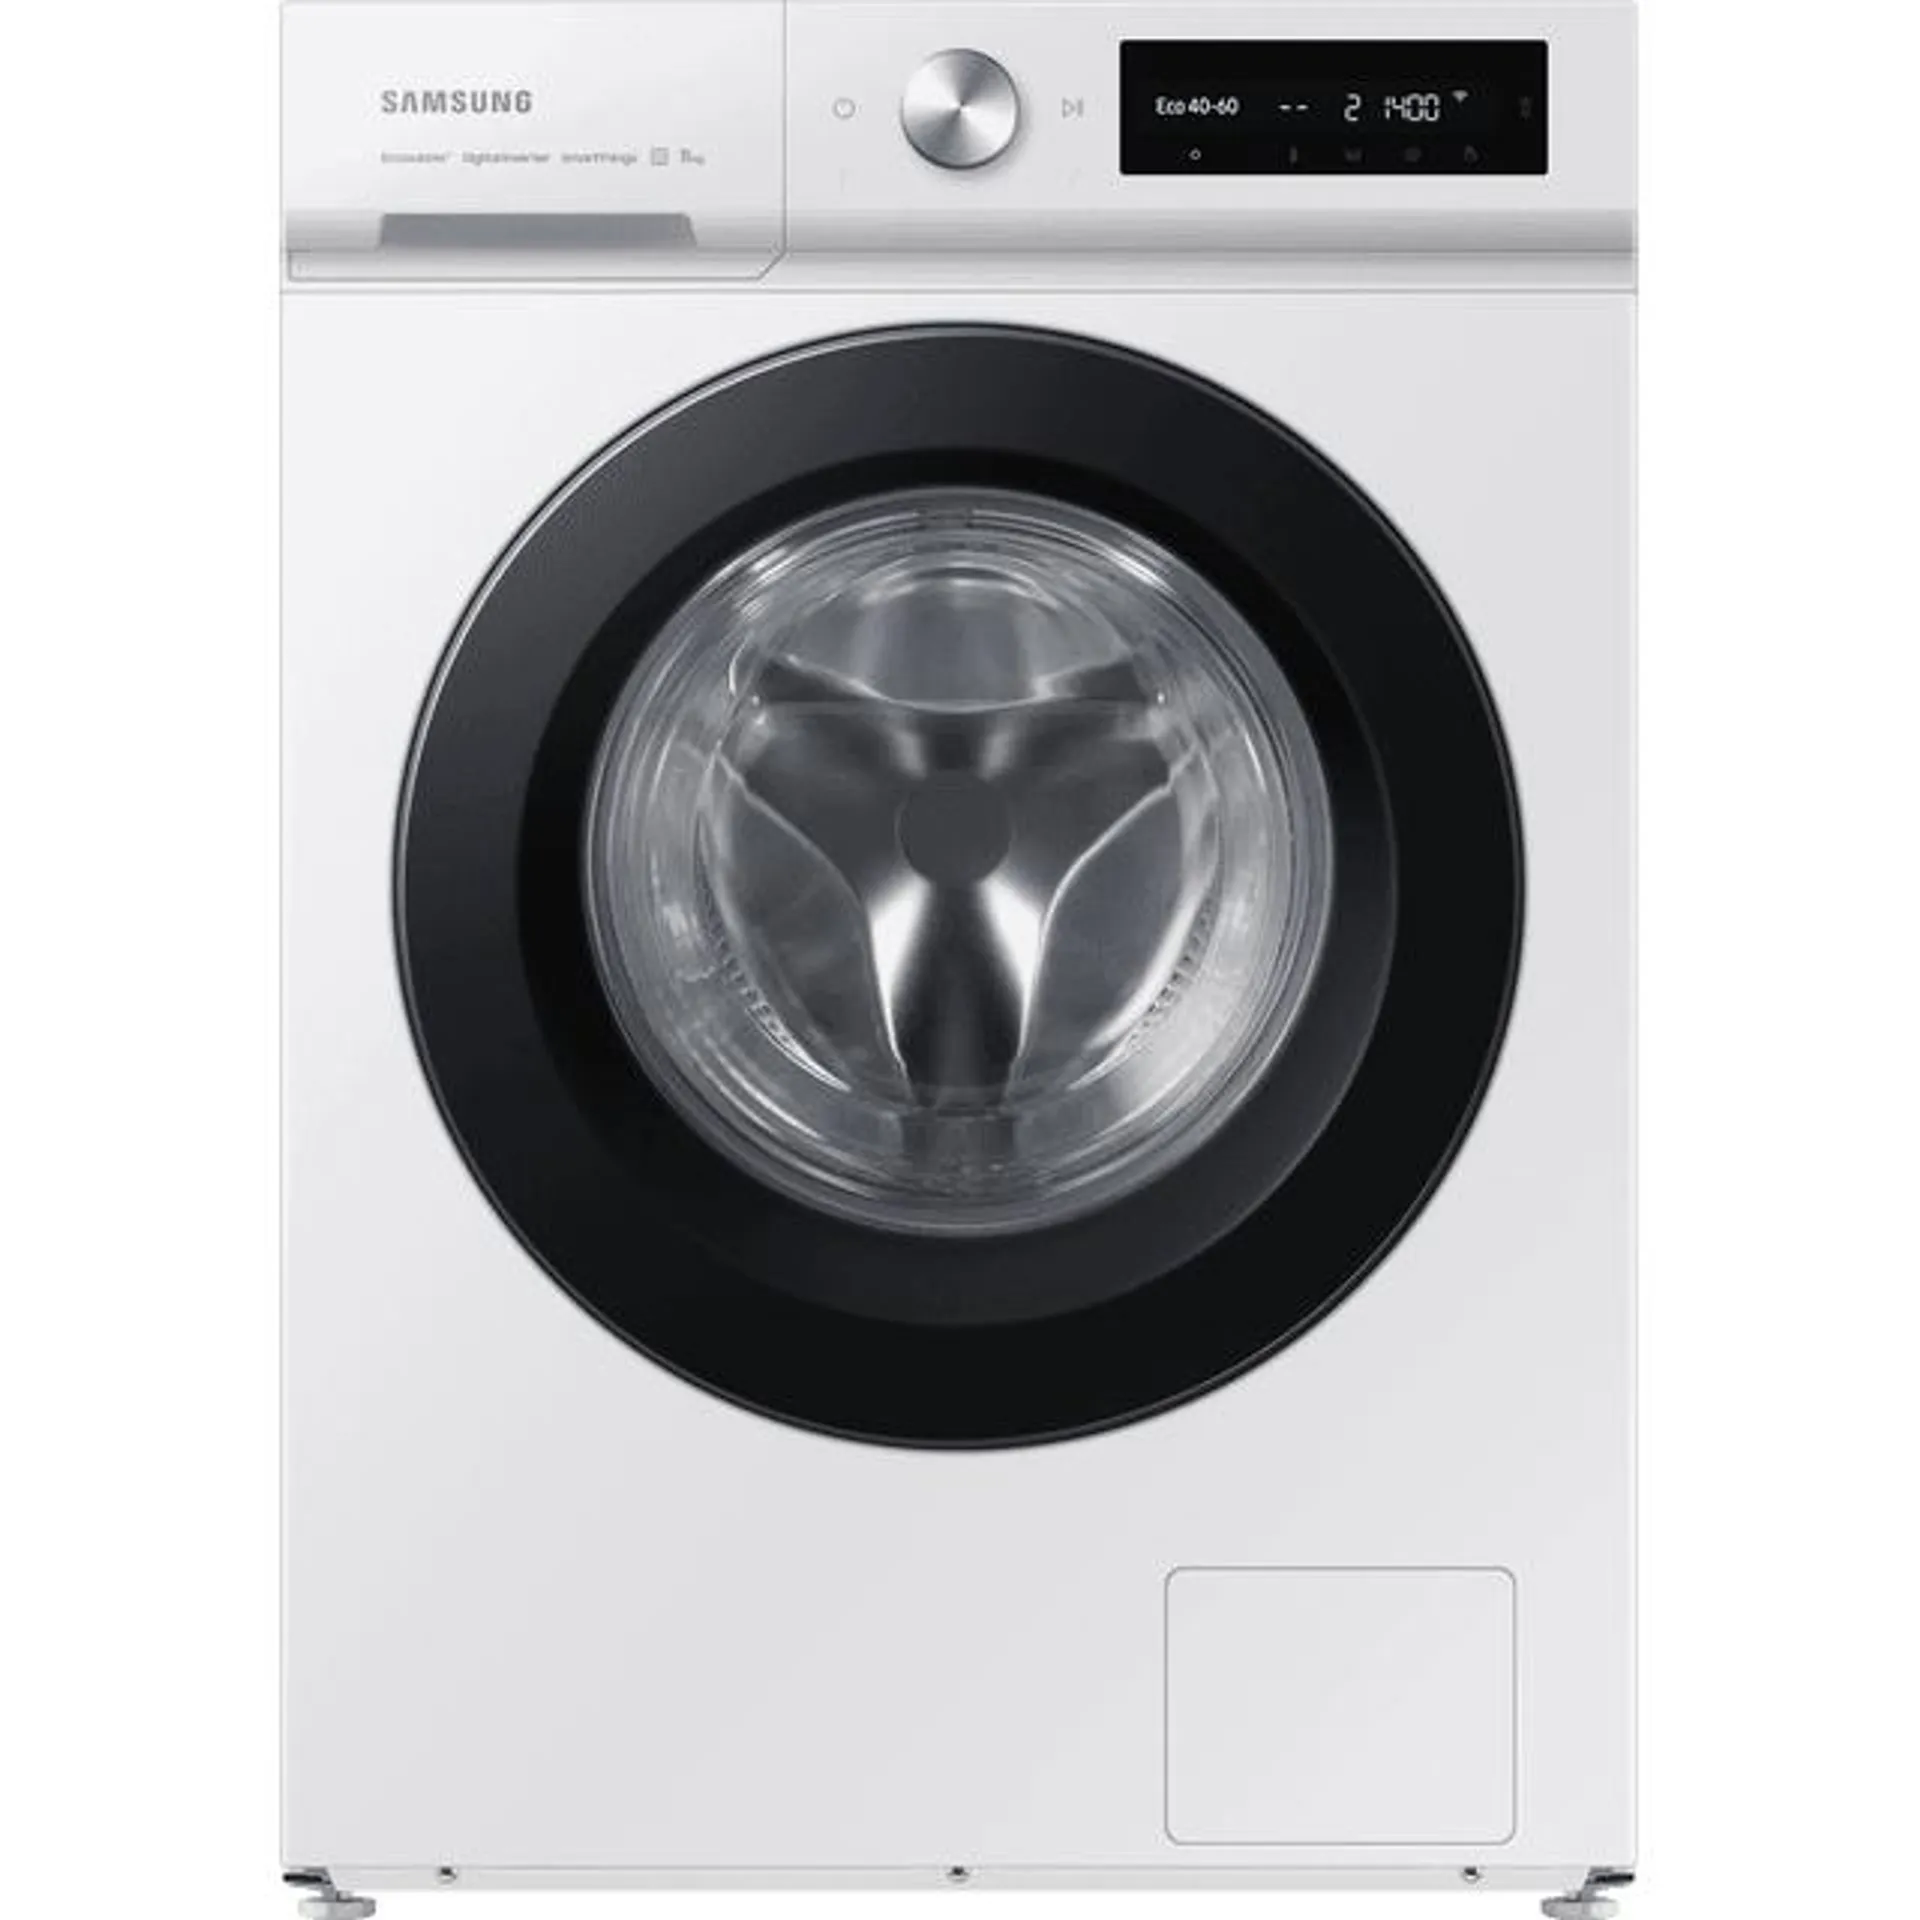 Samsung Series 5+ SpaceMax WW11BB504DAW 11kg Washing Machine with 1400 rpm - White - A Rated